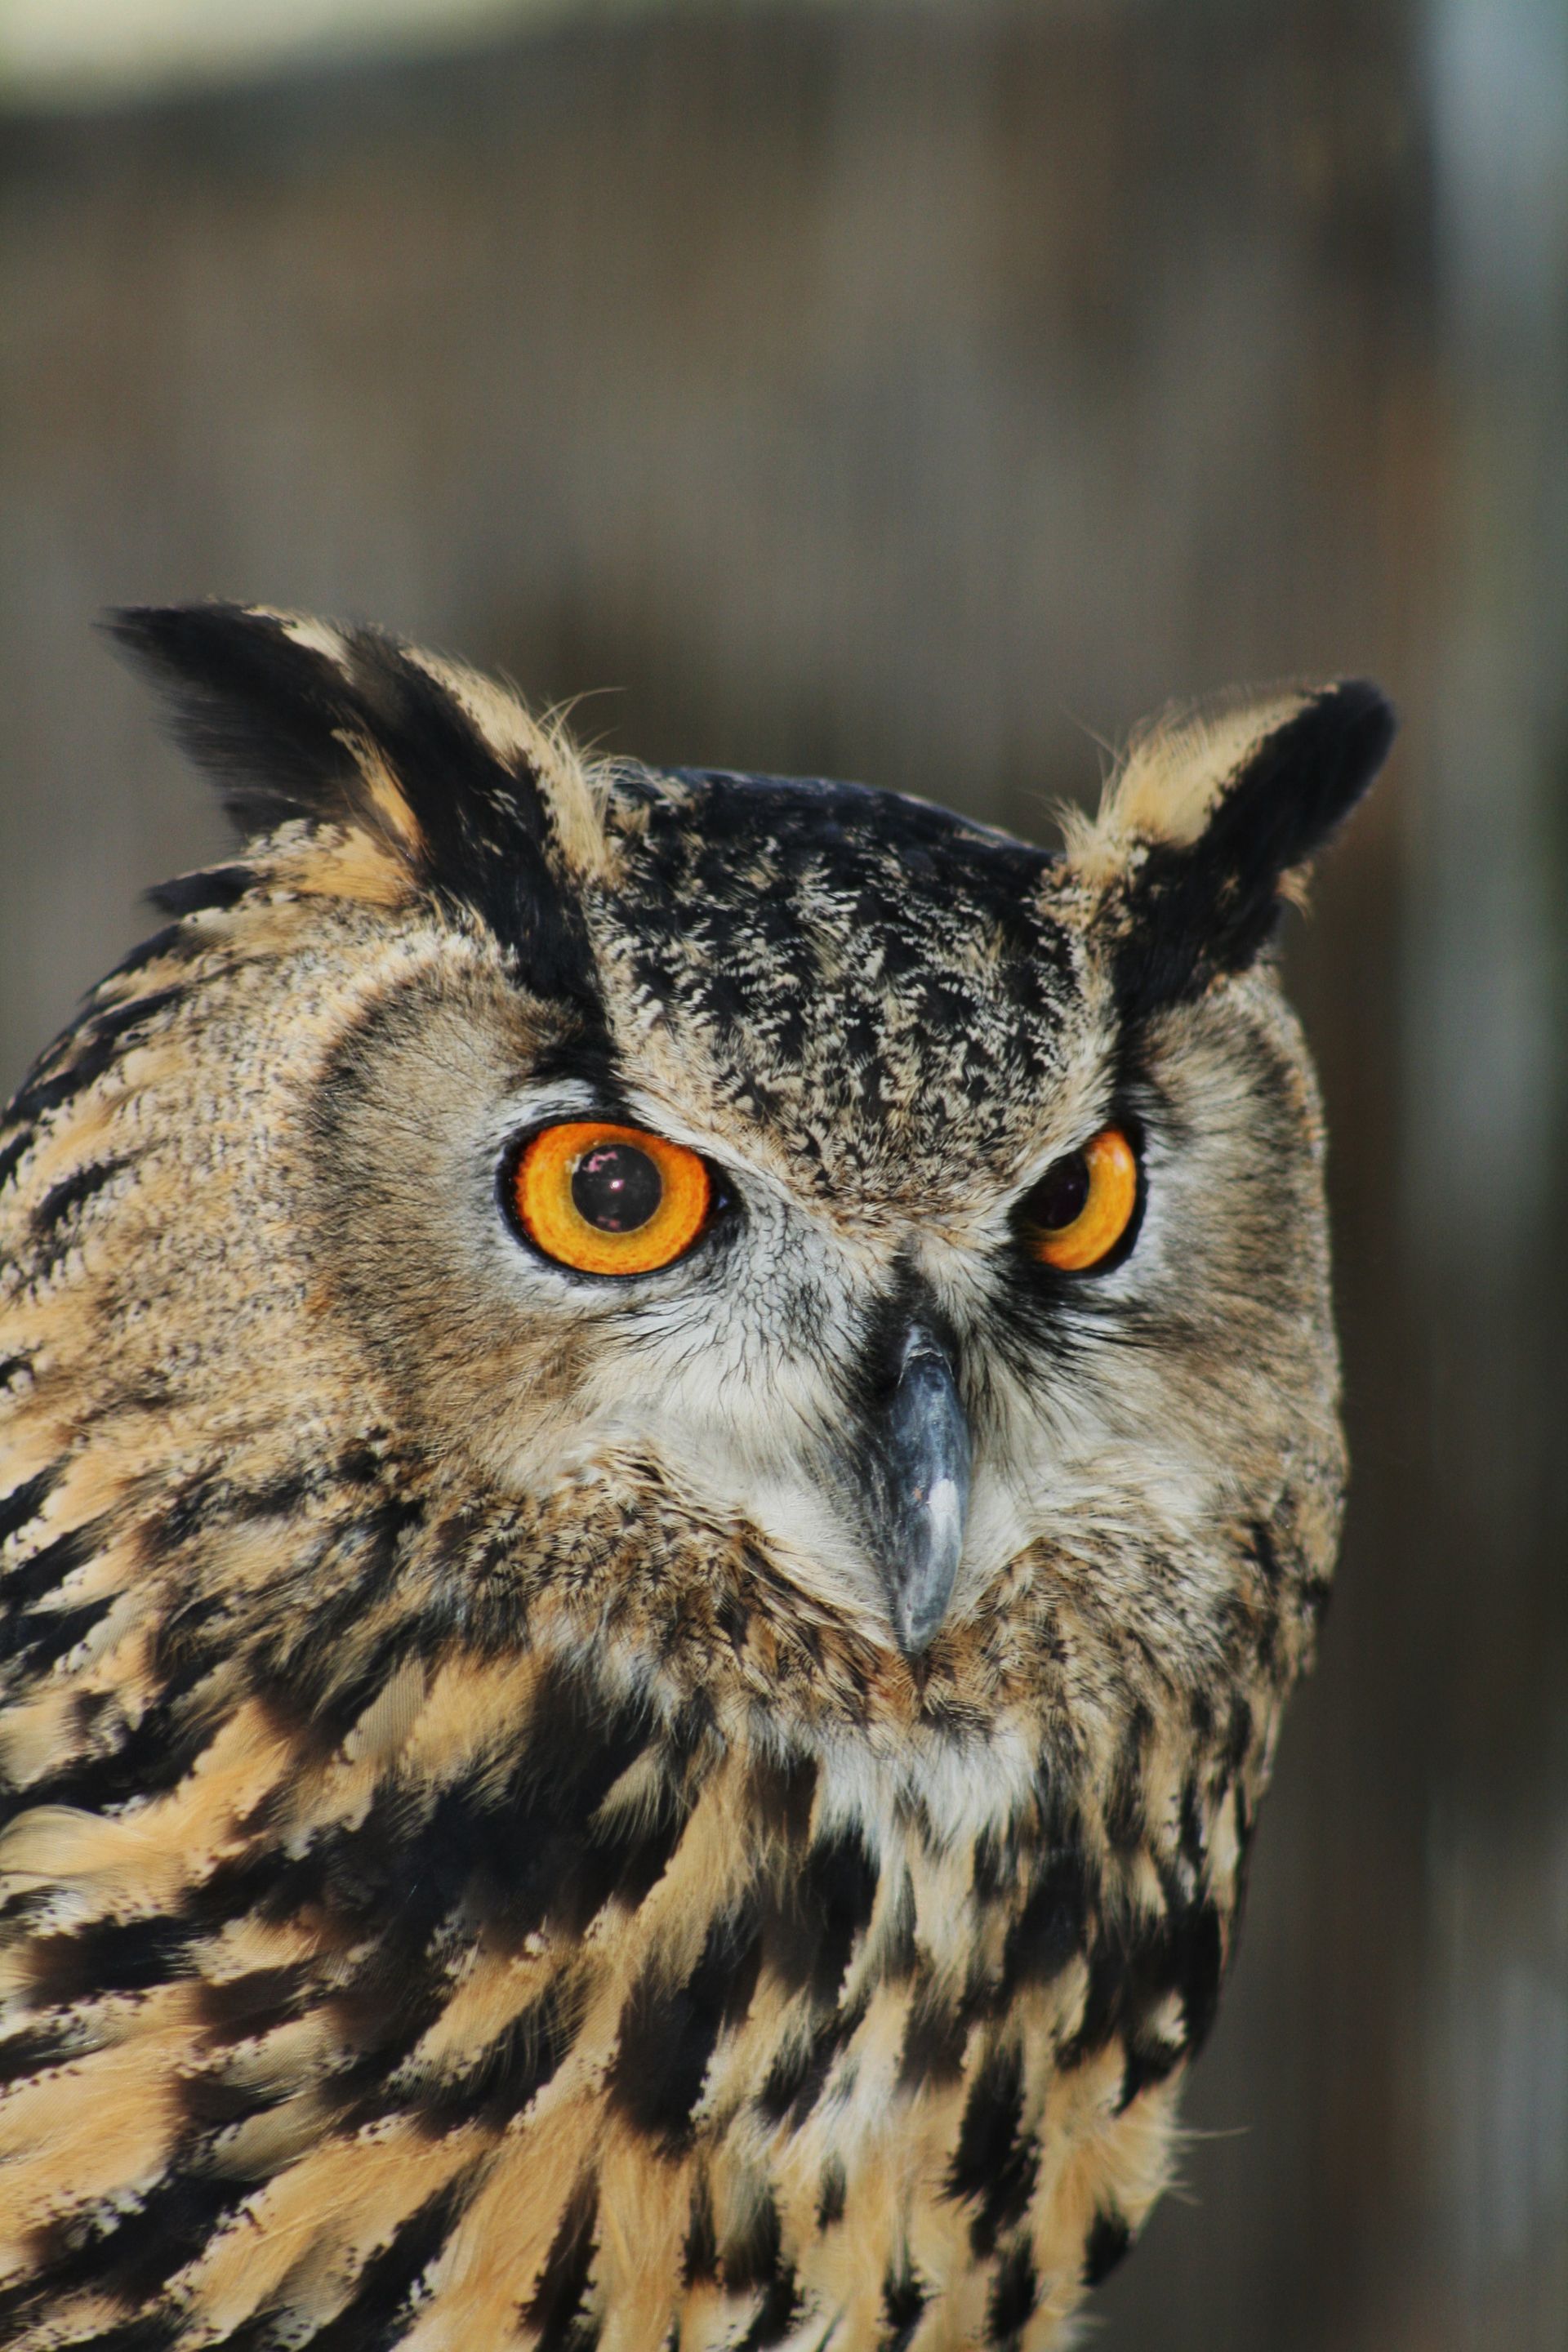 A portrait of a horned owl.